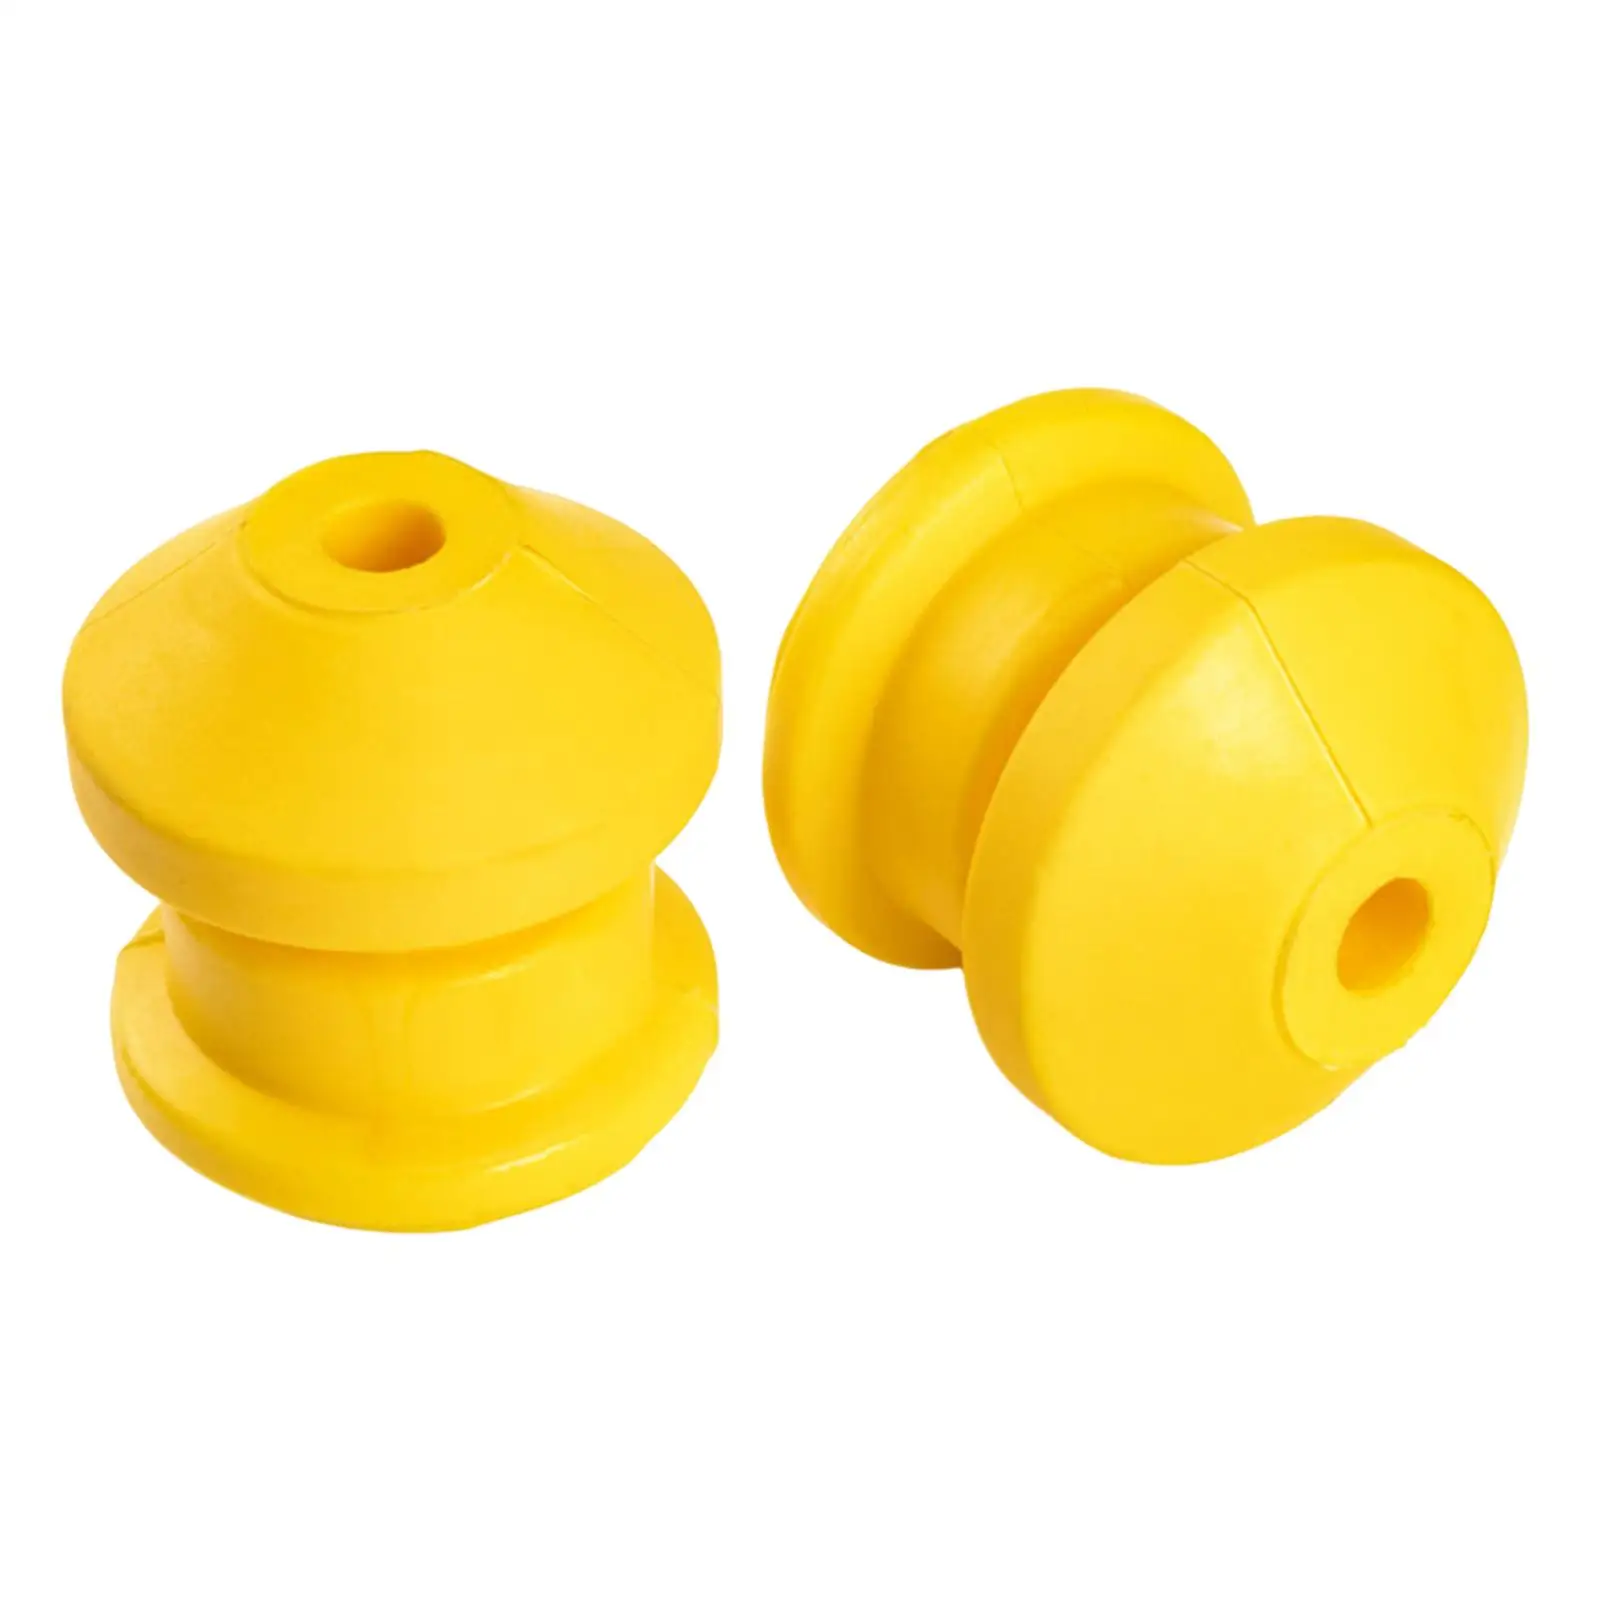 2 Pieces Bumper Stop Absorber 15783030 Durable Car Parts Direct Replaces Rubber Bump Suspension for Hummer H3T 2009-2010